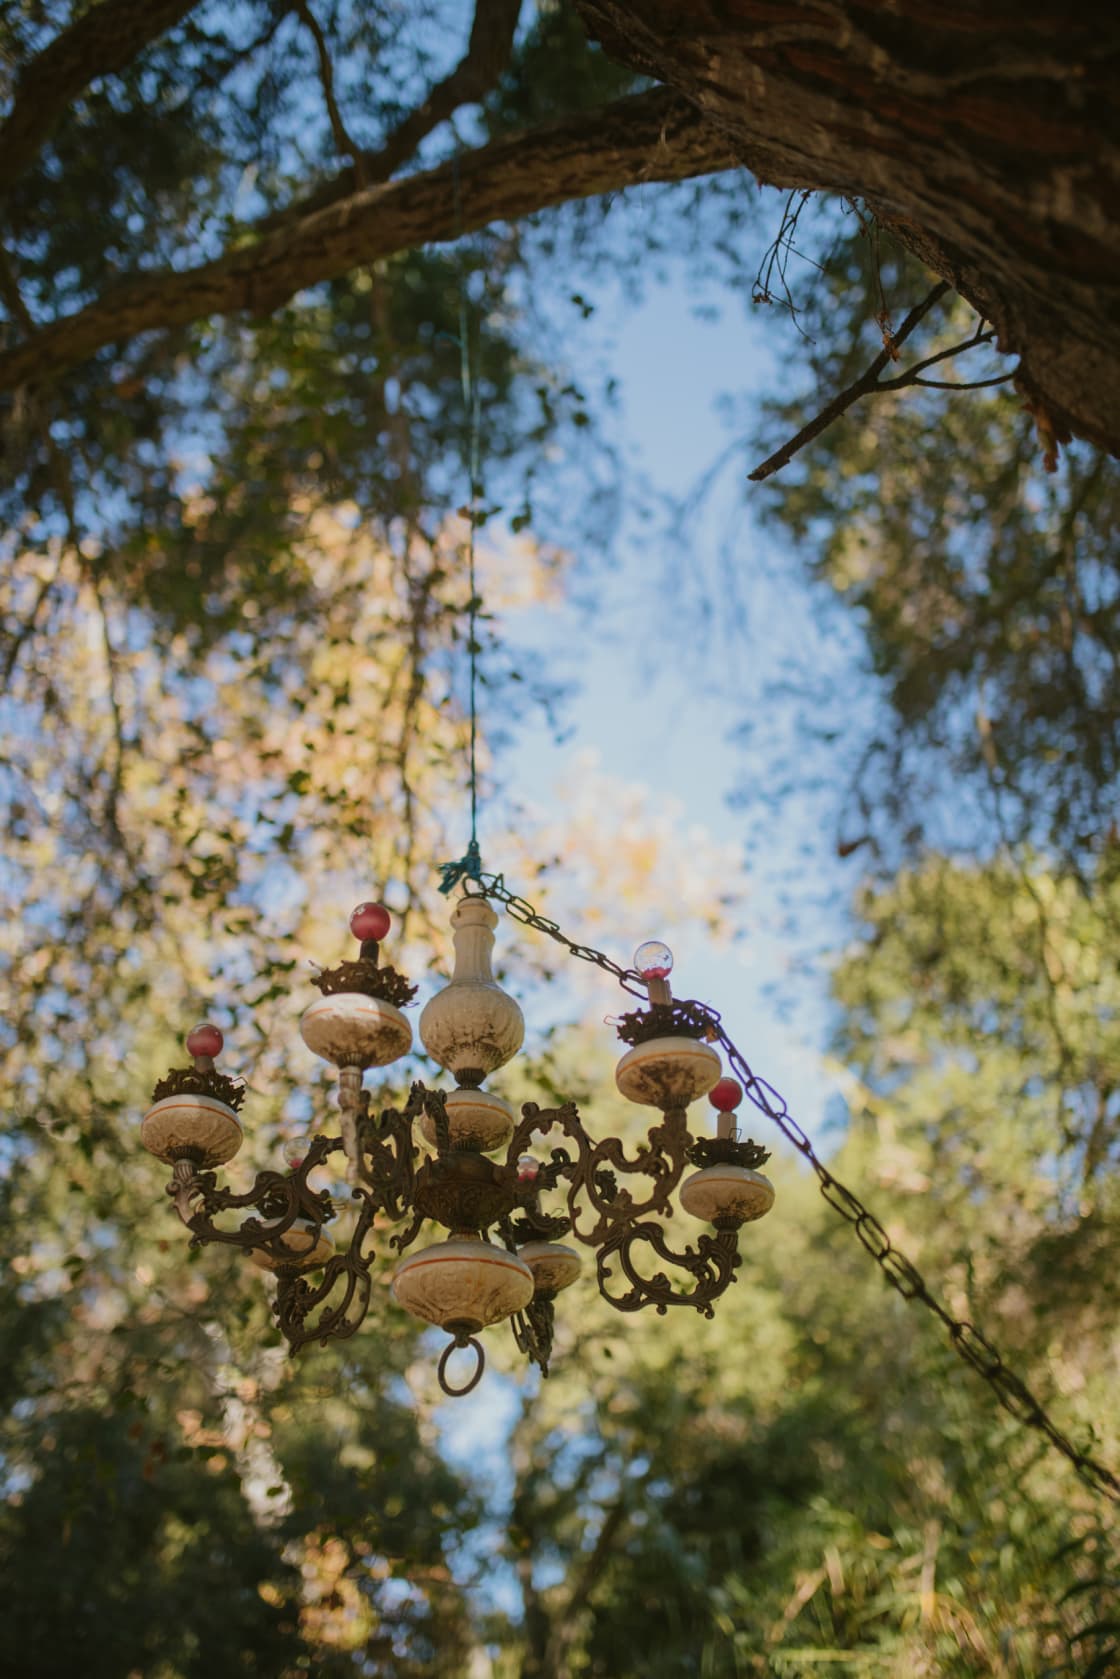 Charming chandelier in the trees. 